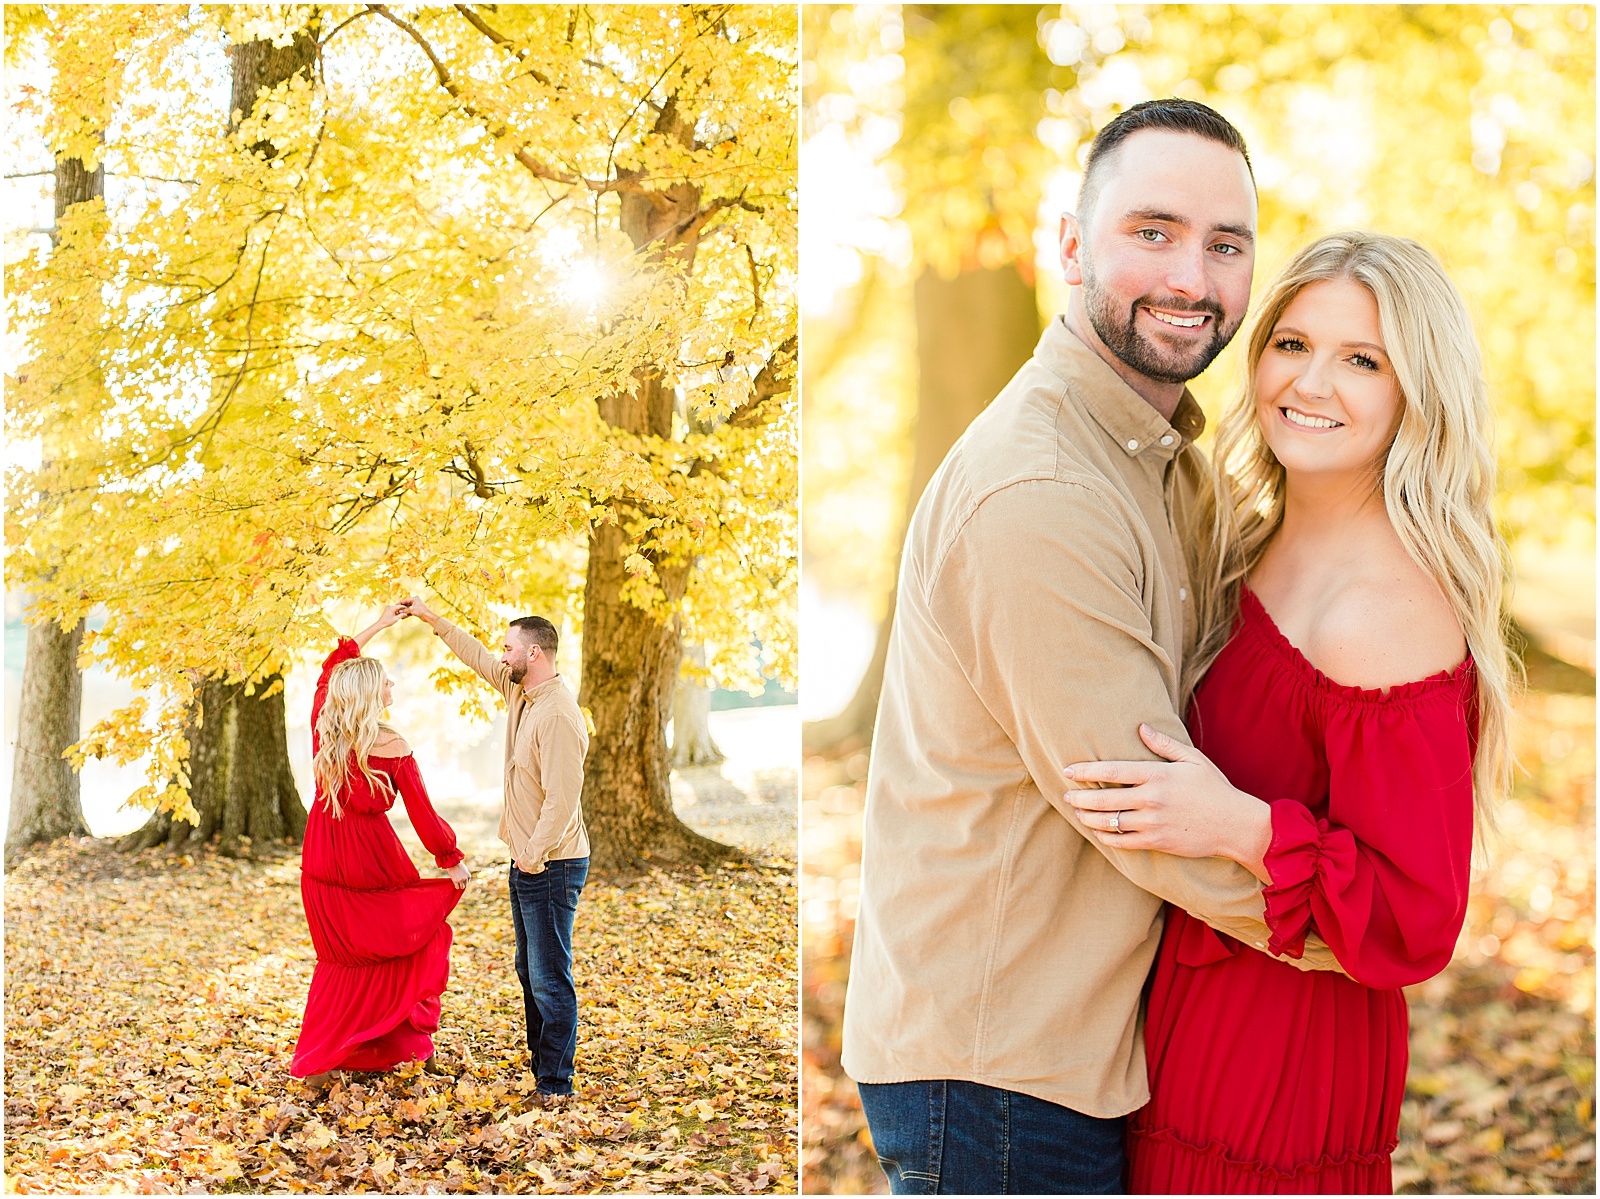 A Southern Indiana Engagement Session | Charleston and Erin | Bret and Brandie Photography025.jpg